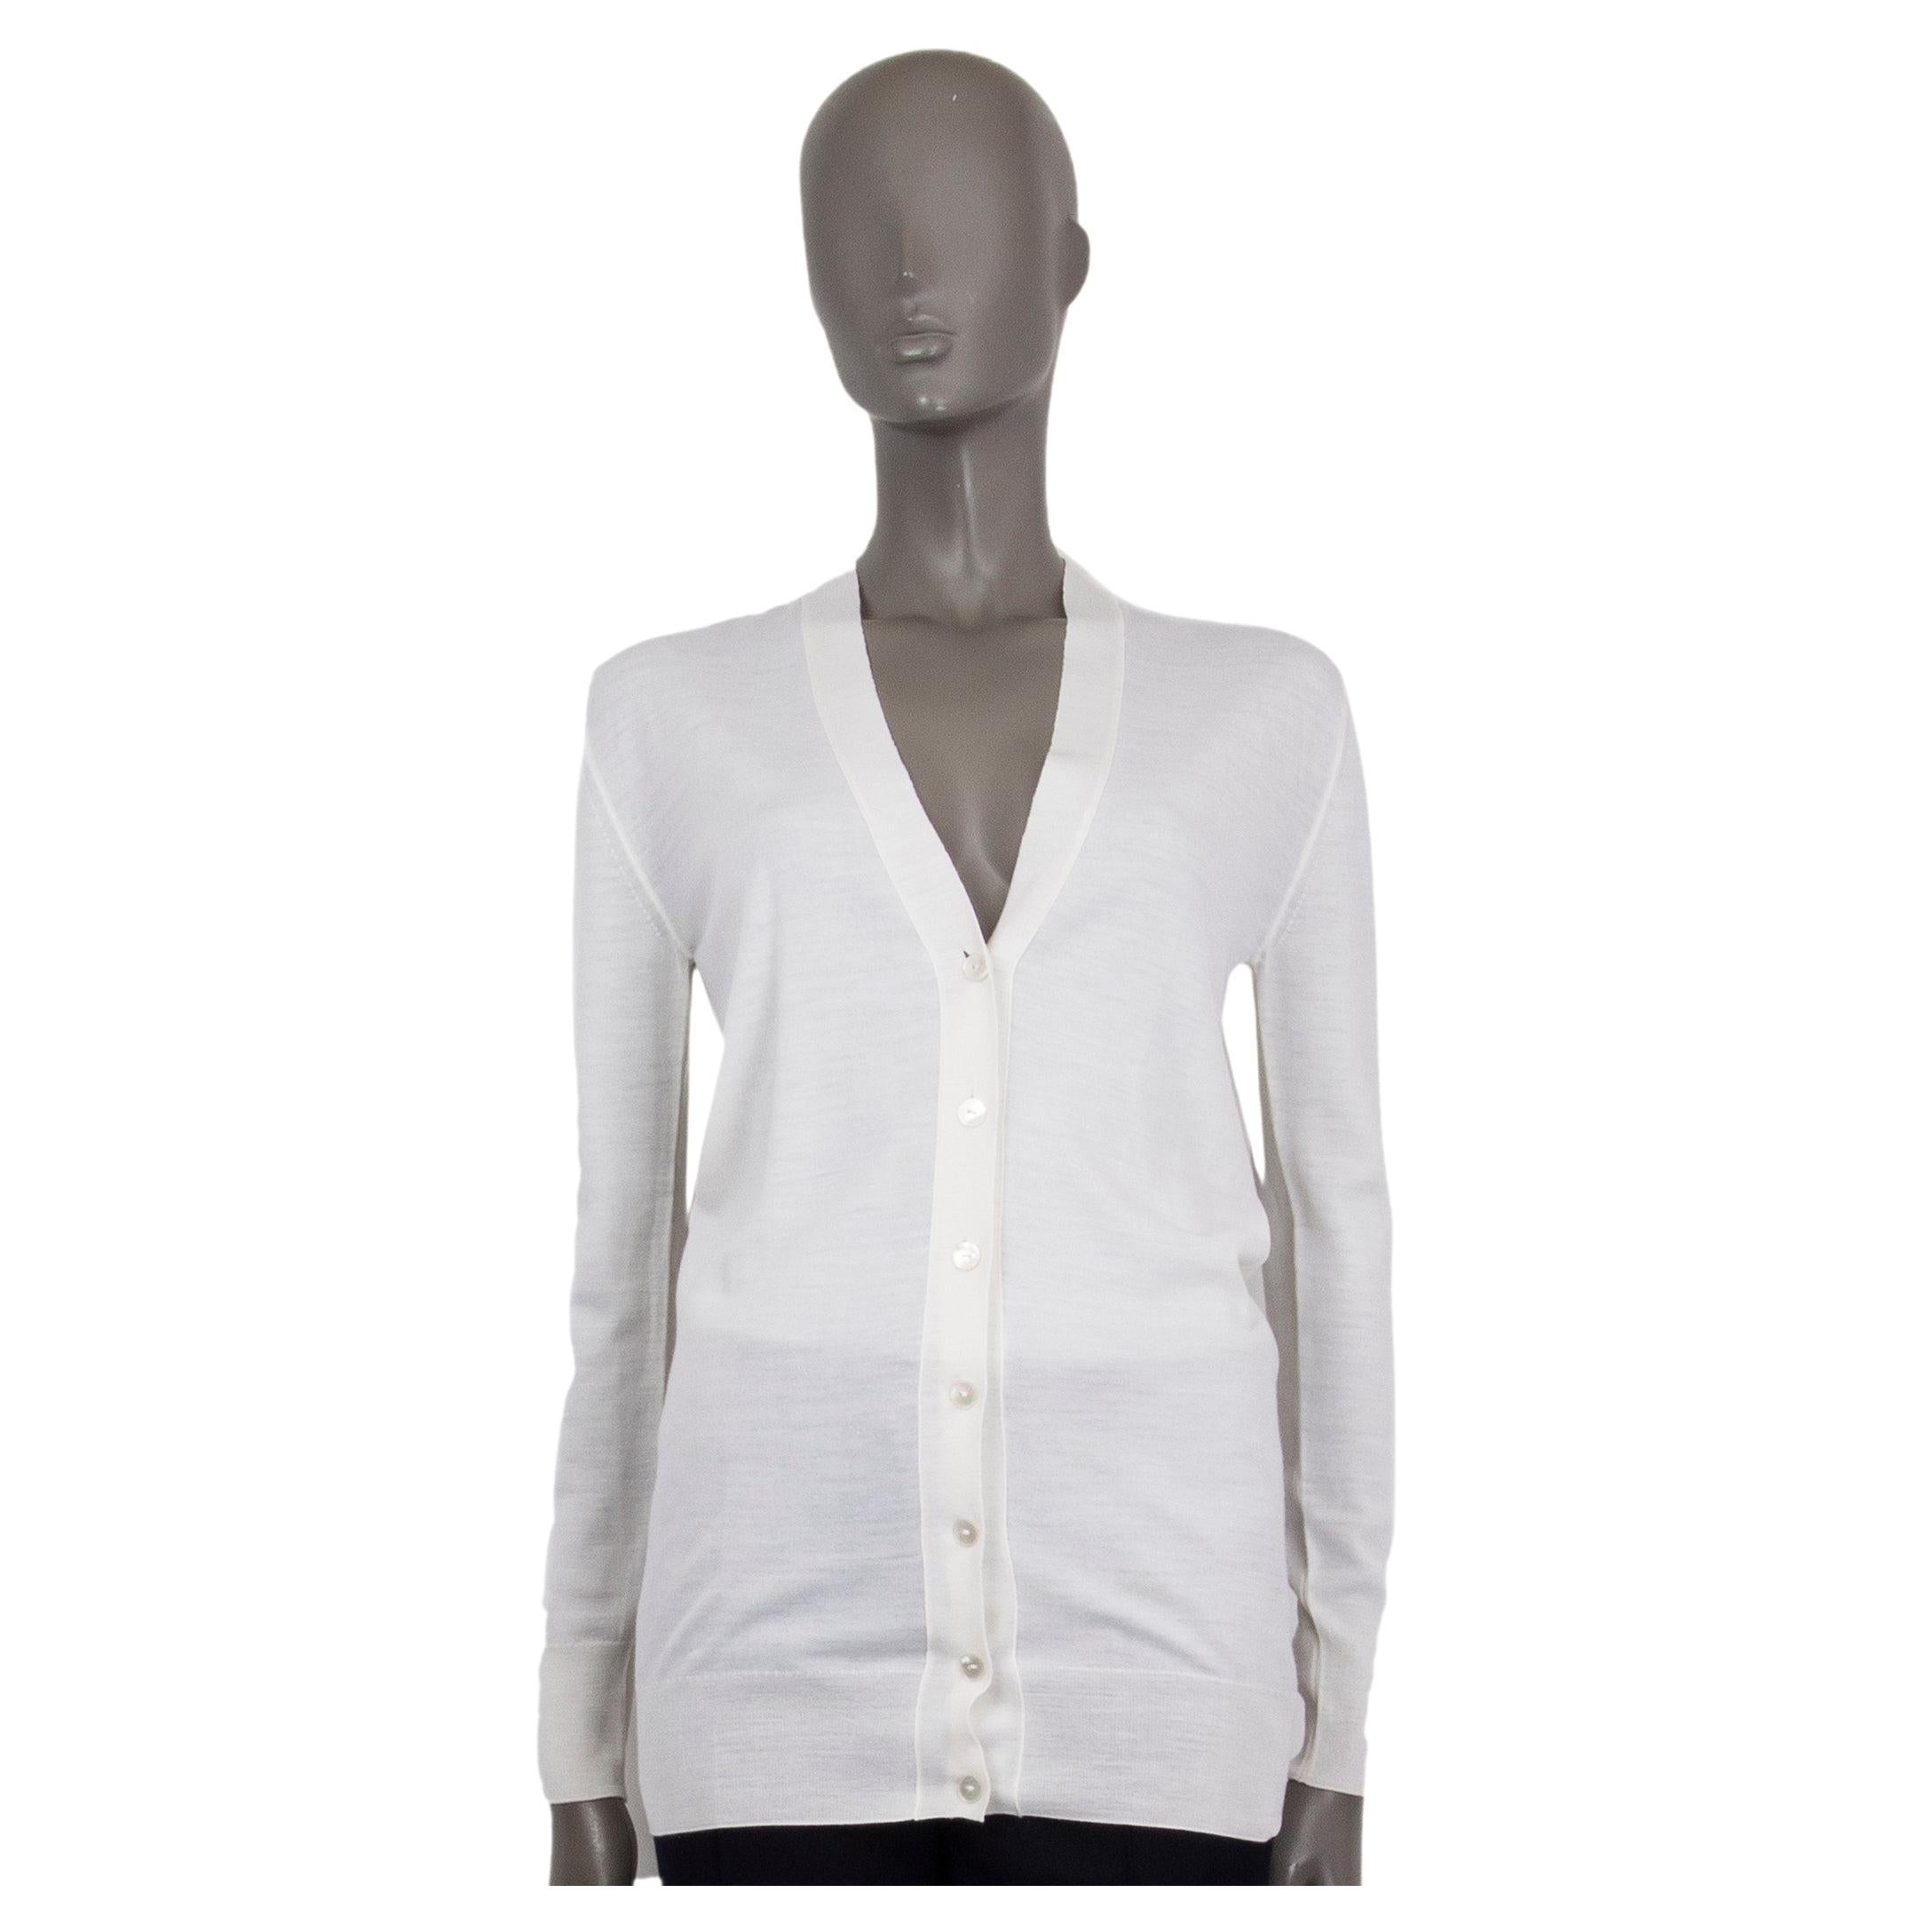 LANVIN white wool LONG CUT BUTTON FRONT V-NECK Cardigan Sweater XS